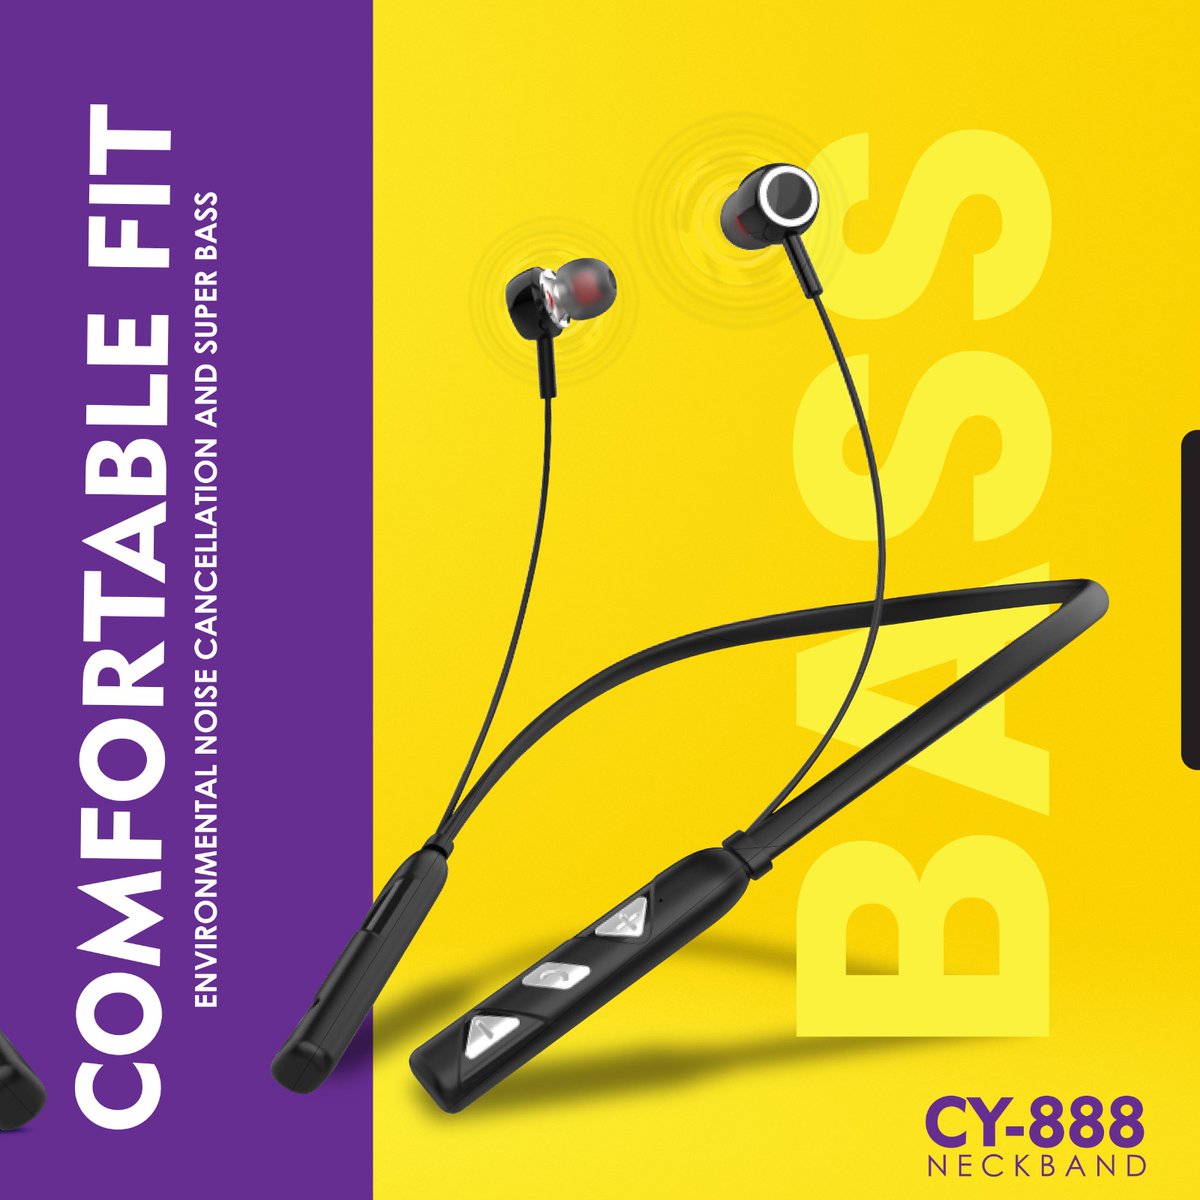 It's time to turn up the volume and let the beats take over.🎧🤩
Our CY-888 deliver unparalleled sound quality that will leave you speechless.🙌🎶
.
.
.
#cyomi #musictherapy #cyomi #musiclover #trending #songs #music #neckband #neckbandearphones #newproduct